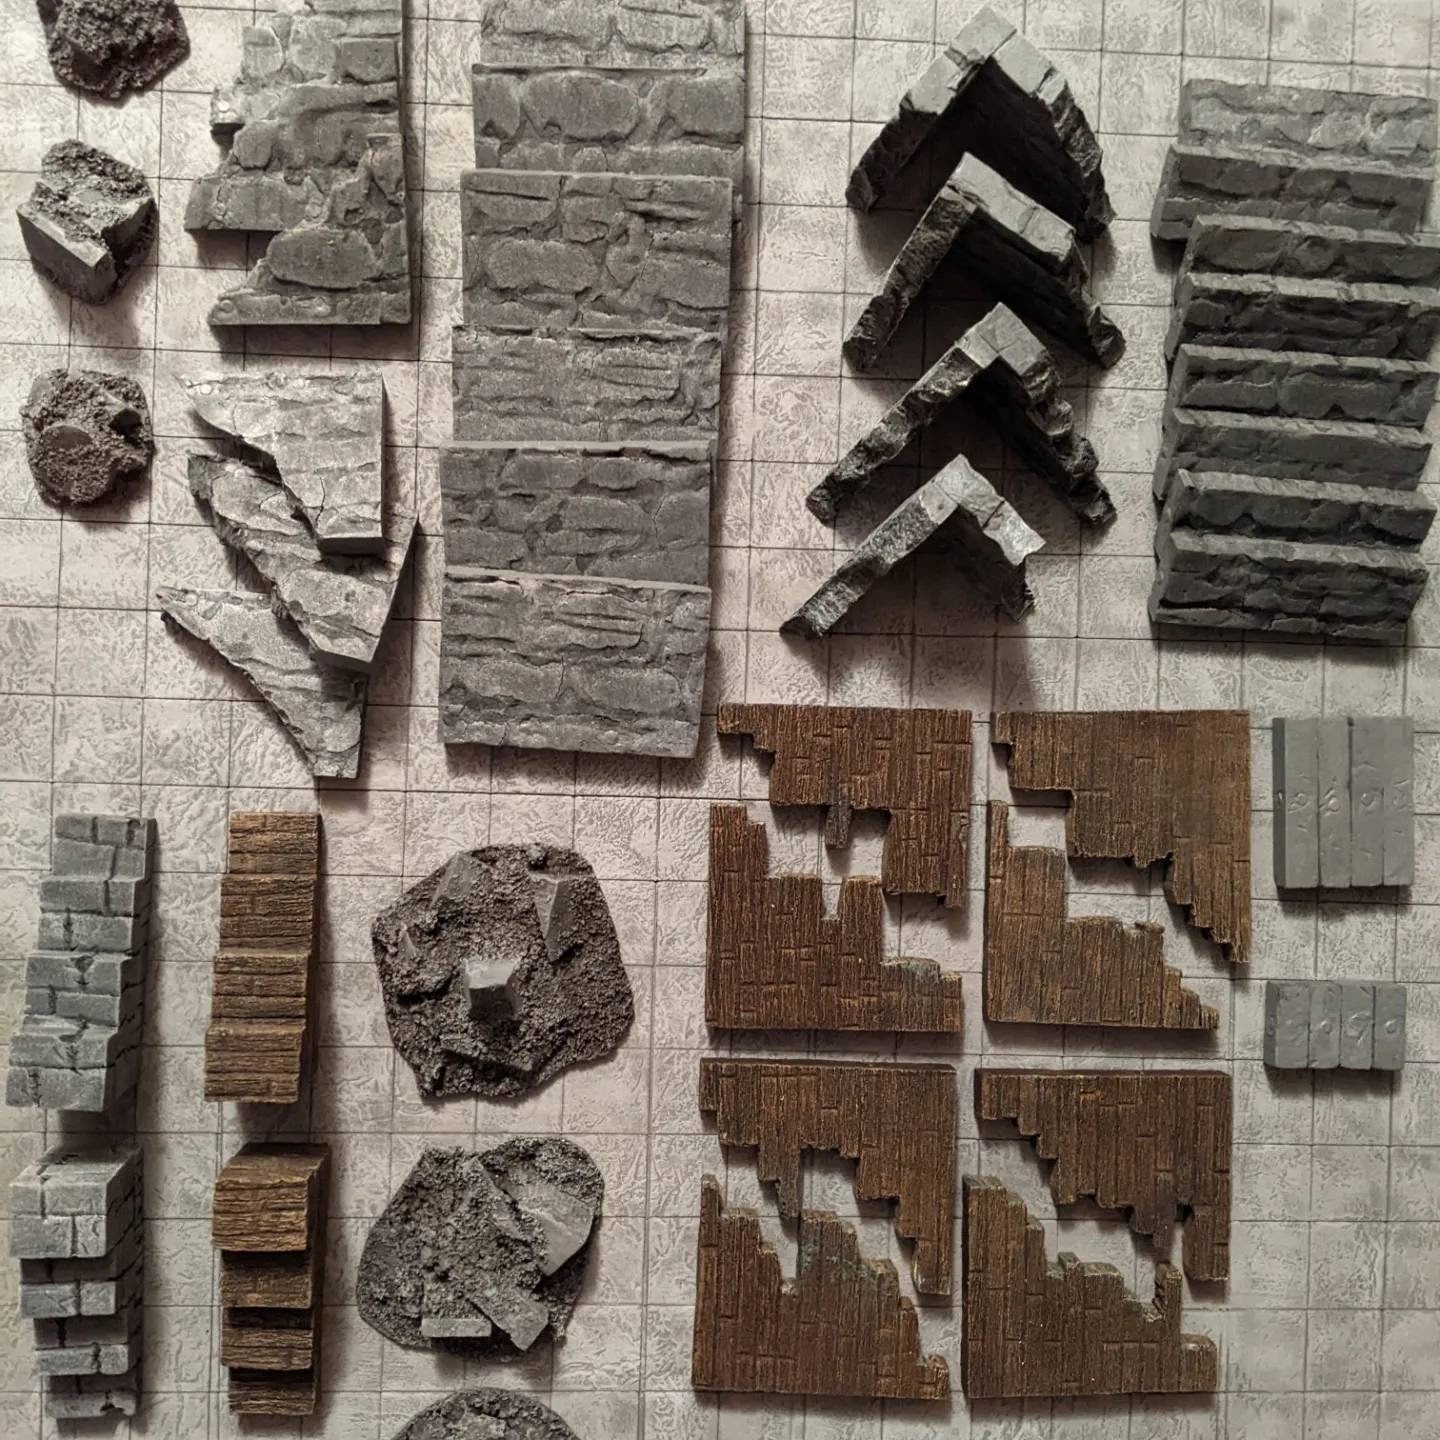 Modular Ruins Set for Dungeons and Dragons/ Warhammer 40k/ Age of Sigmar Terrain